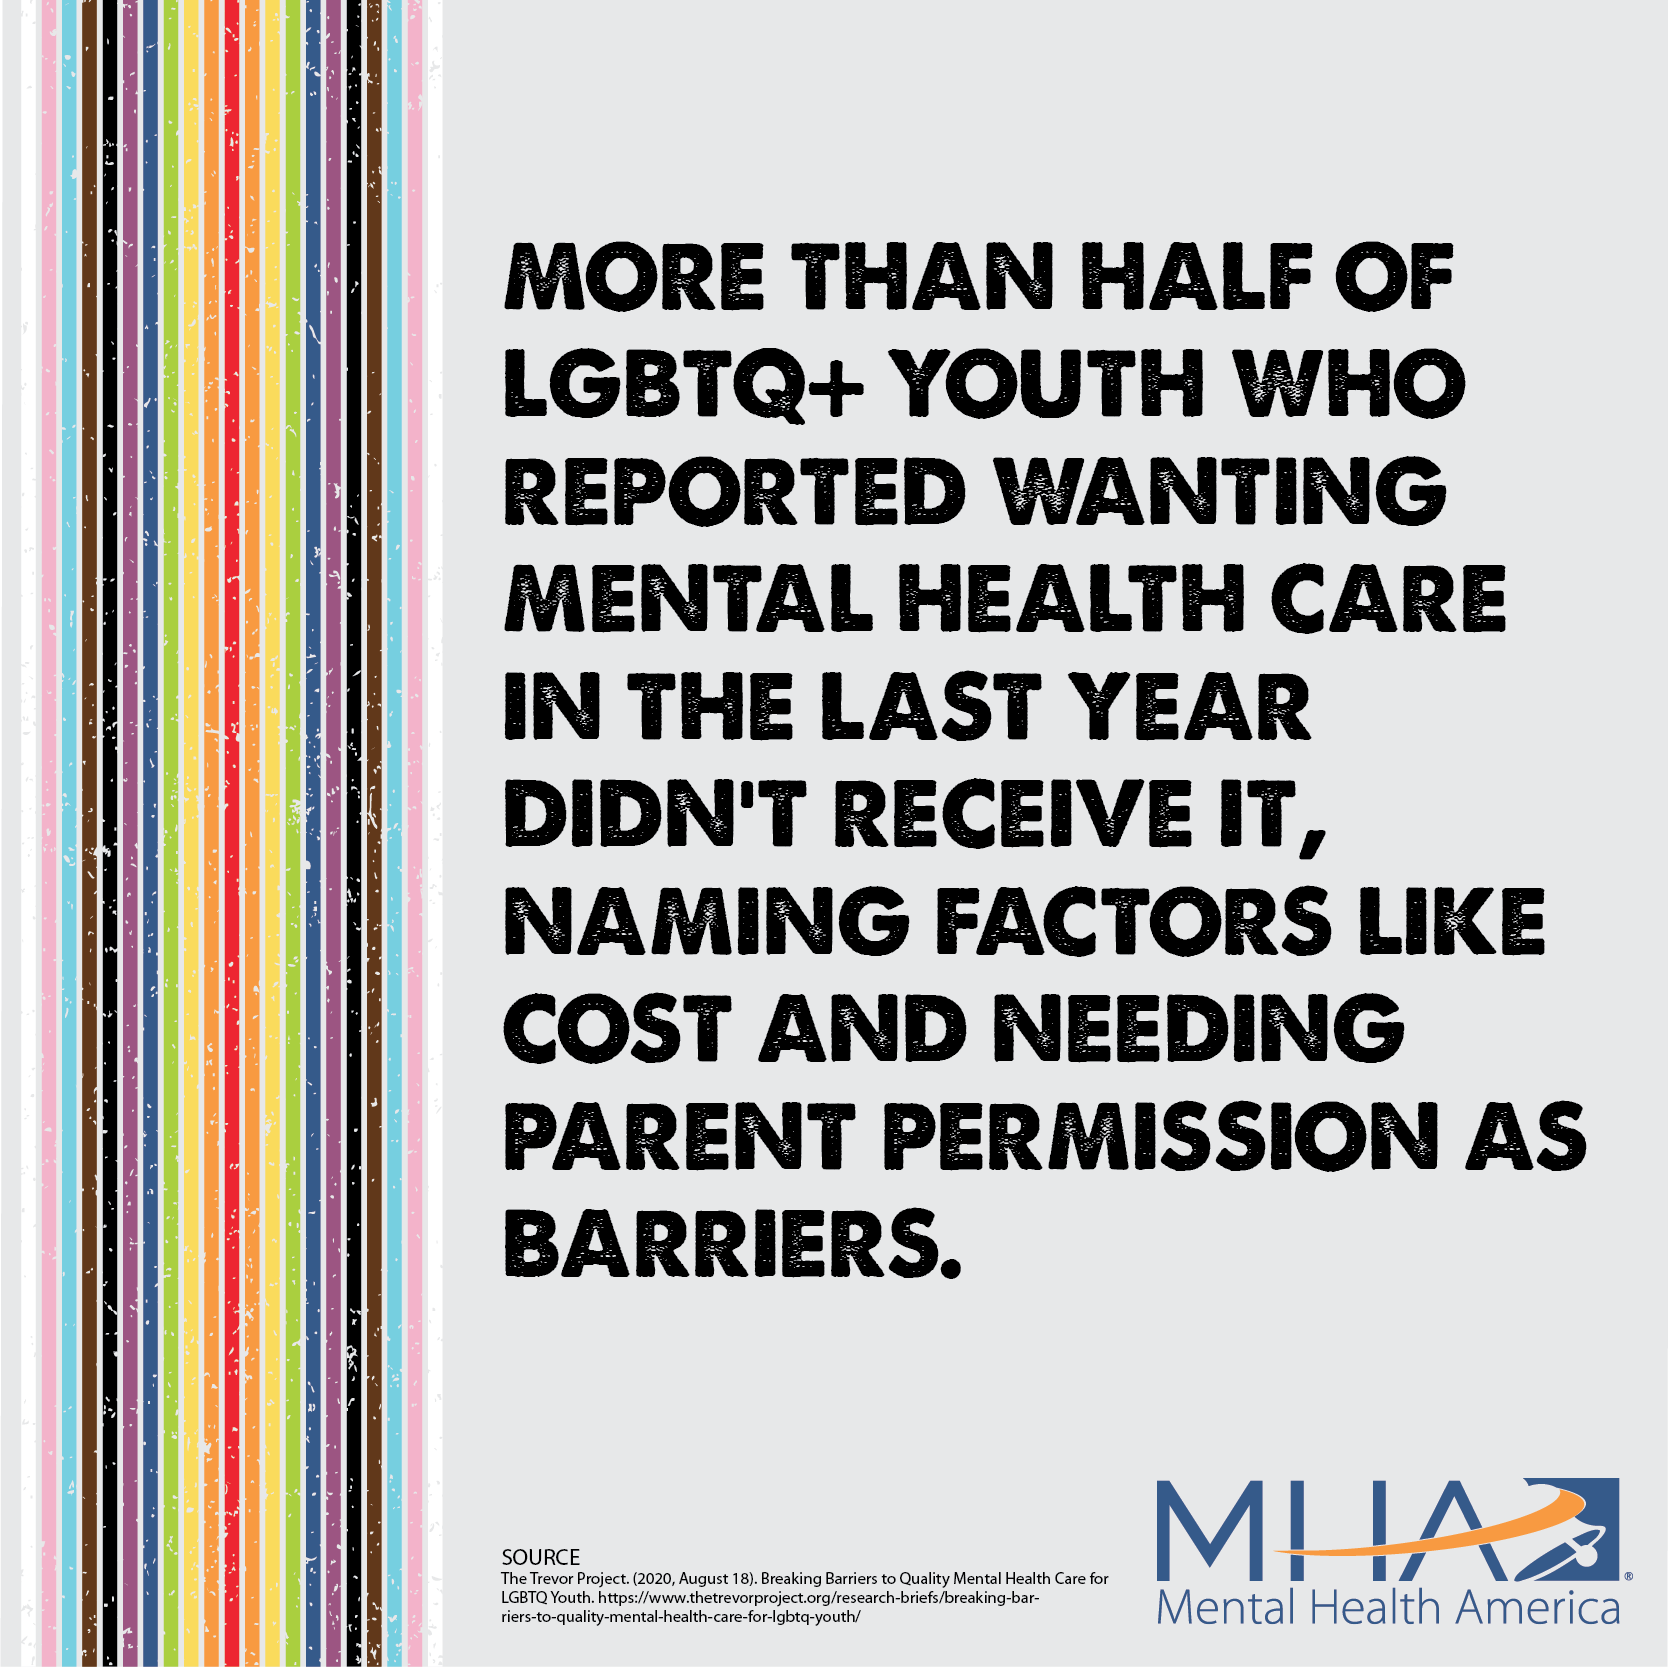 More than half of LGBTQ+ youth who reported wanting mental health care in the last year didn't receive it, naming factors like cost and needing parent permission as barriers.